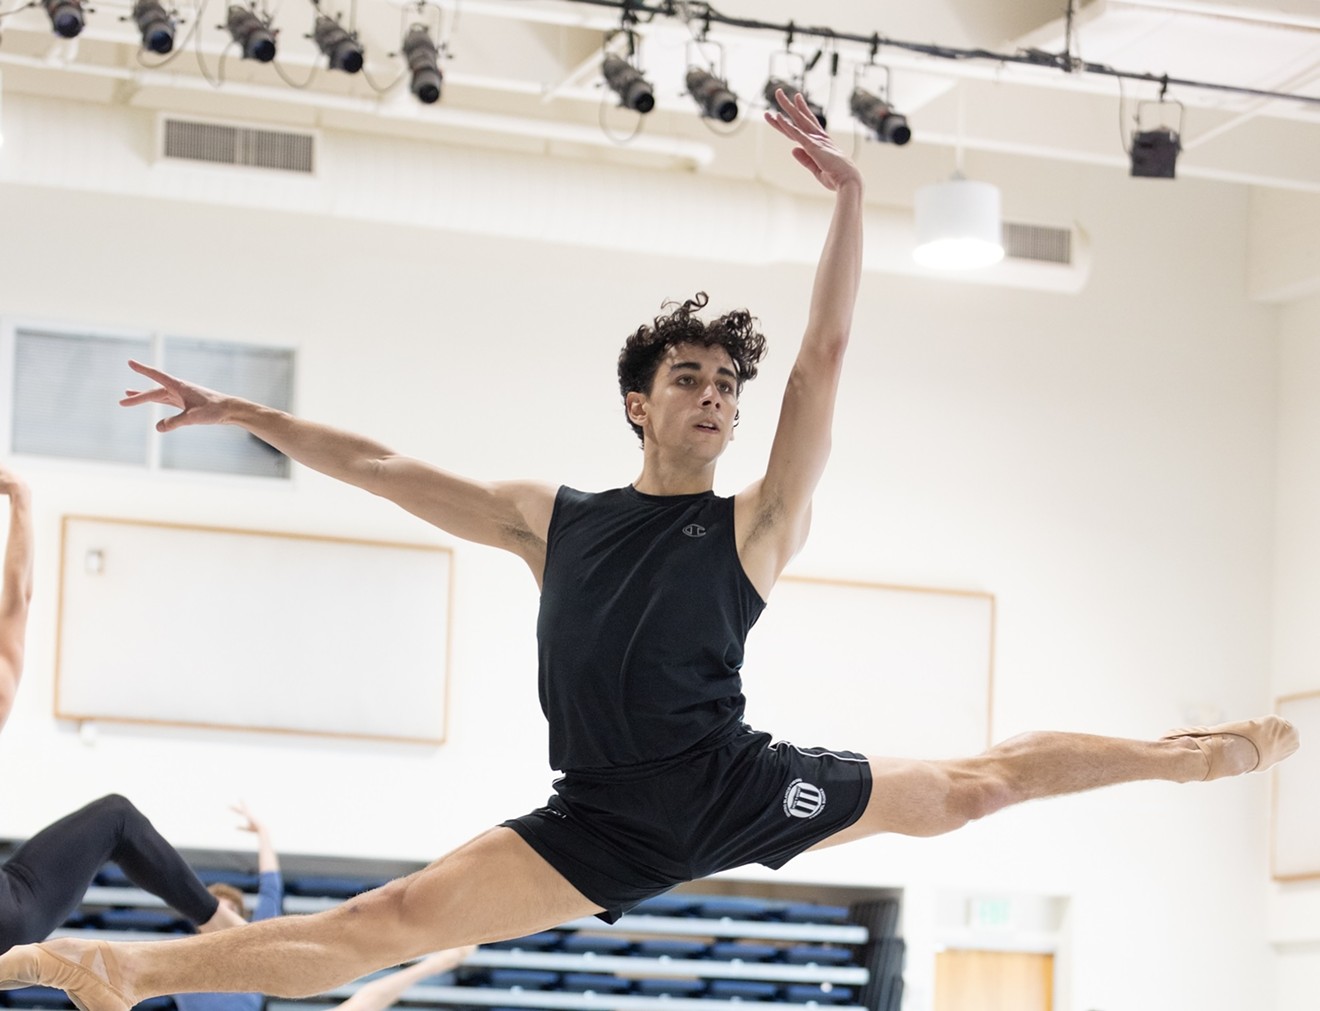 Francisco Schilereff in rehearsal for Miami City Ballet's Delight, a world premiere by Ricardo Amarante, part of the company's "Spring Mix," opening Friday, March 8 at the Adrienne Arsht Center for the Performing Arts.